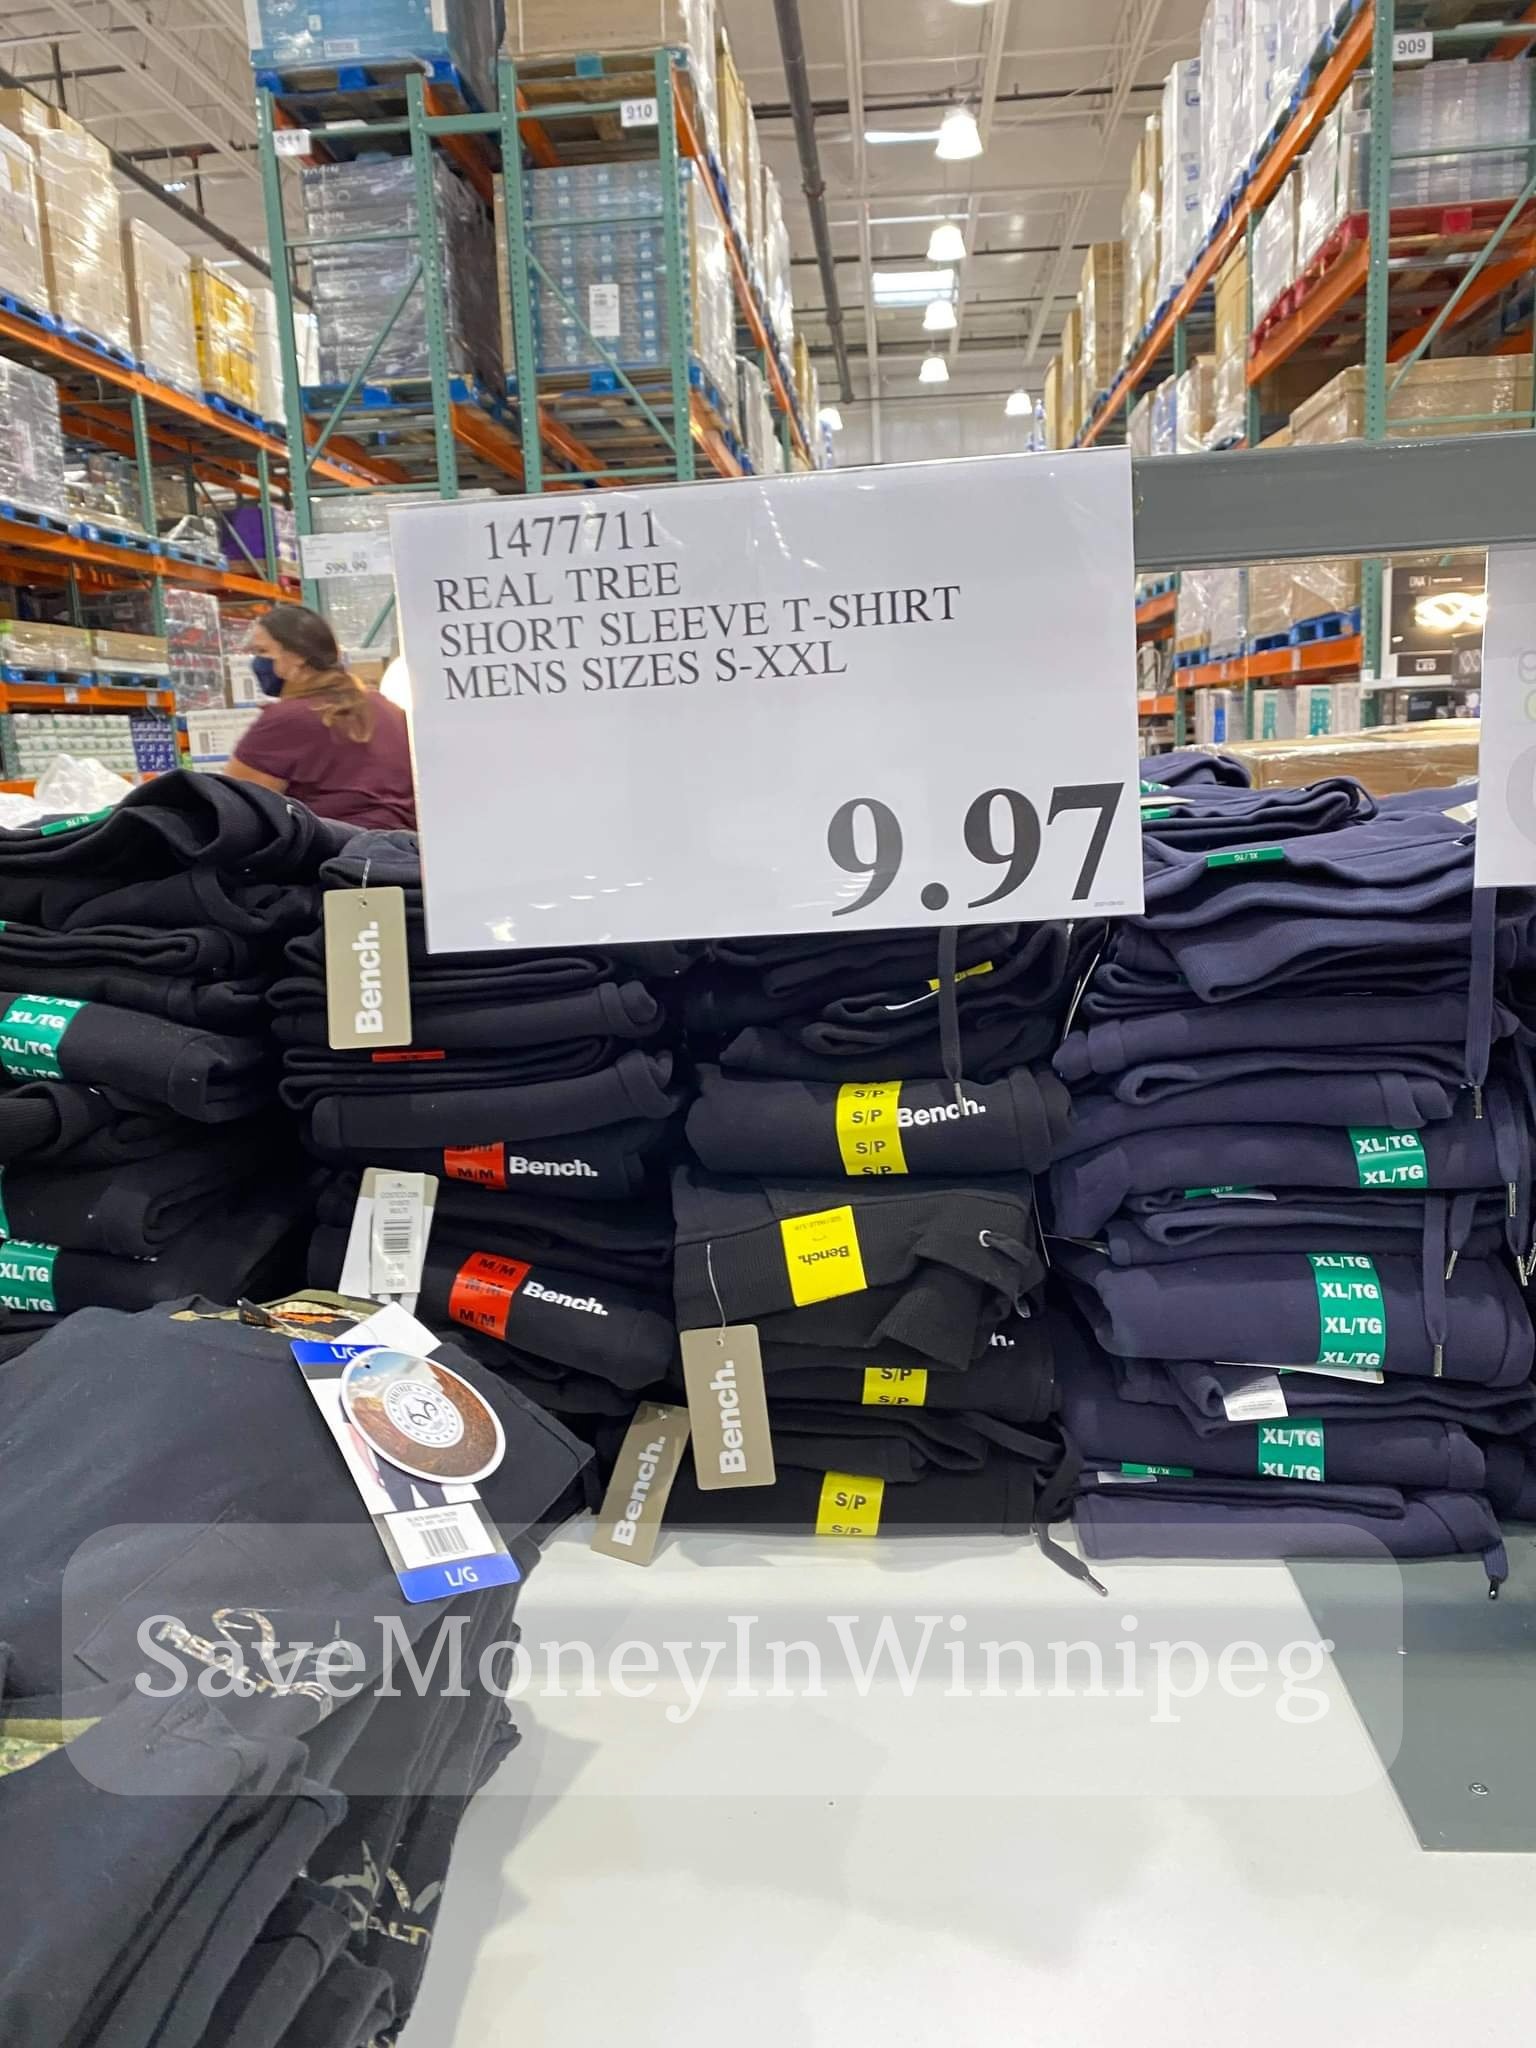 Part 1 (of 3!!!!) Costco unadvertised deals of the week starting